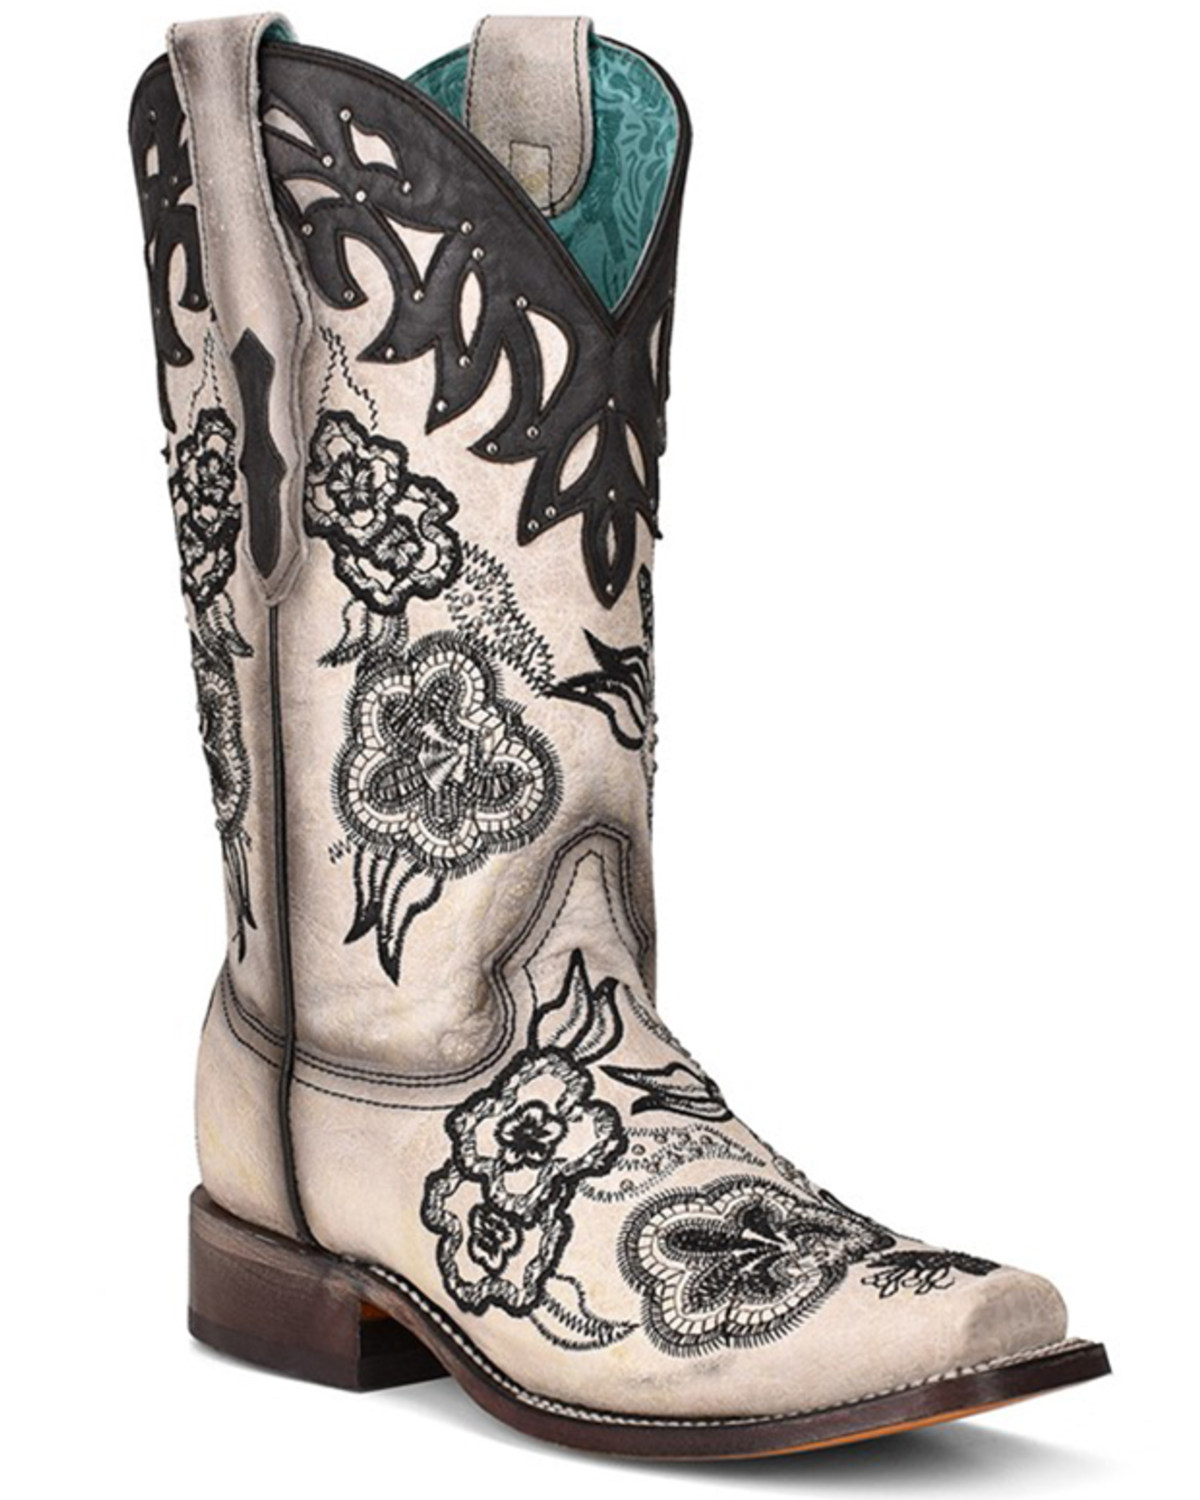 Corral Women's White Overlay Western Boots - Square Toe